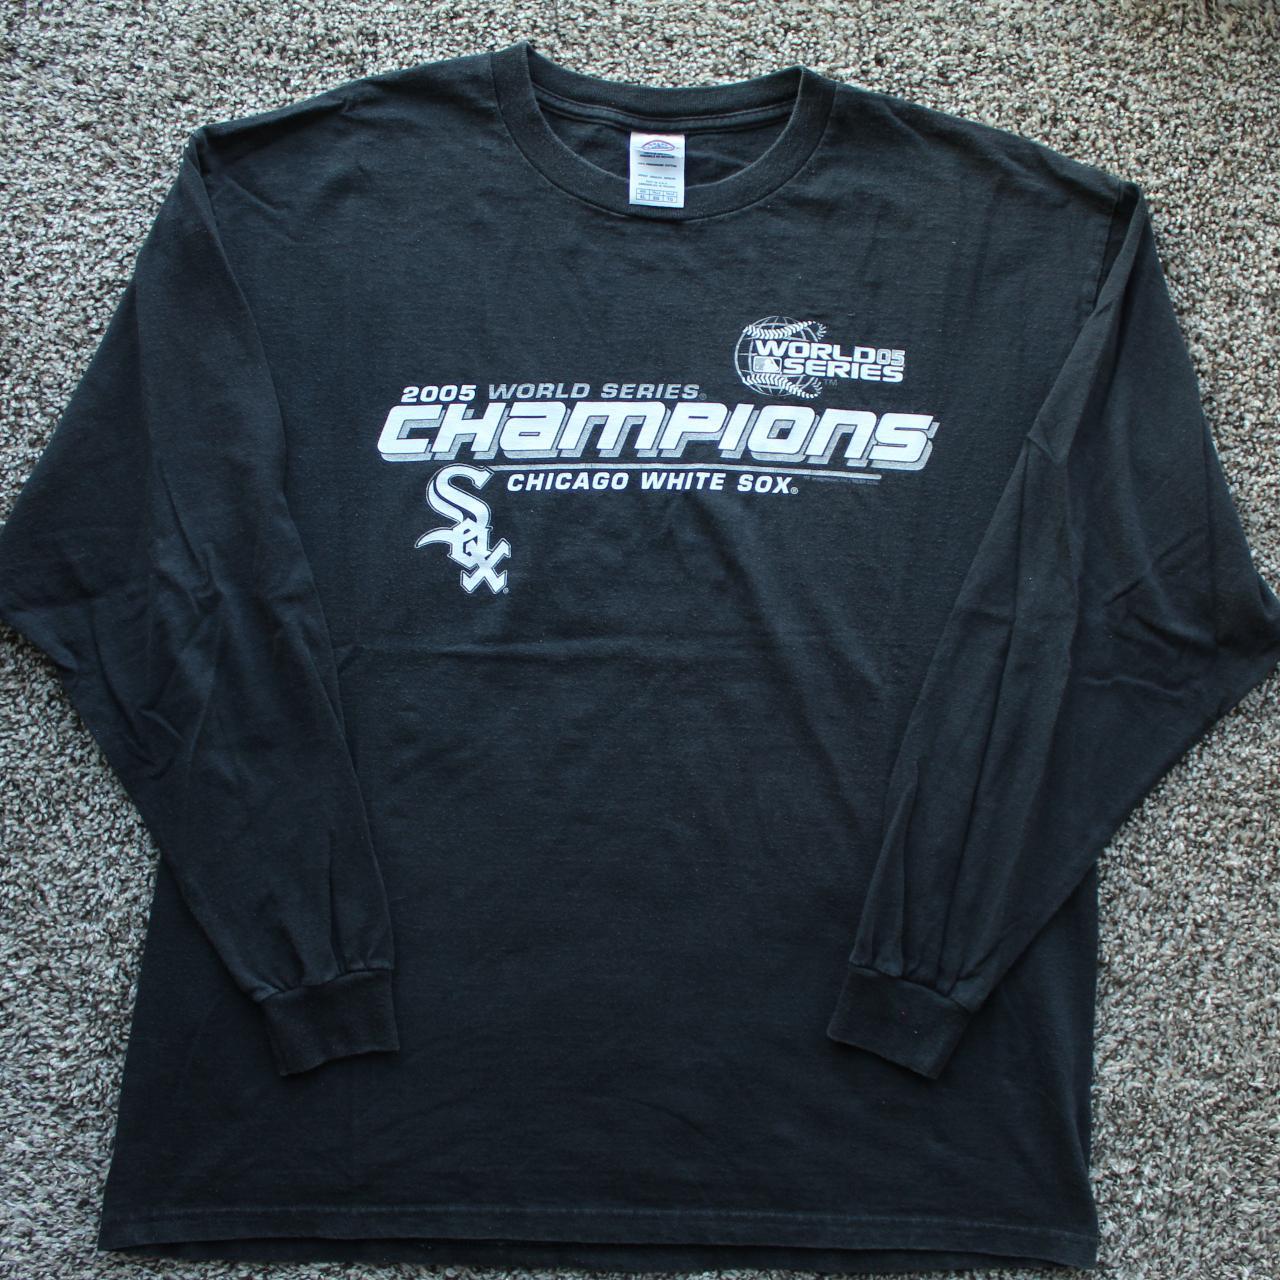 Chicago White Sox 2005 World Series Champions T-shirt - Youth